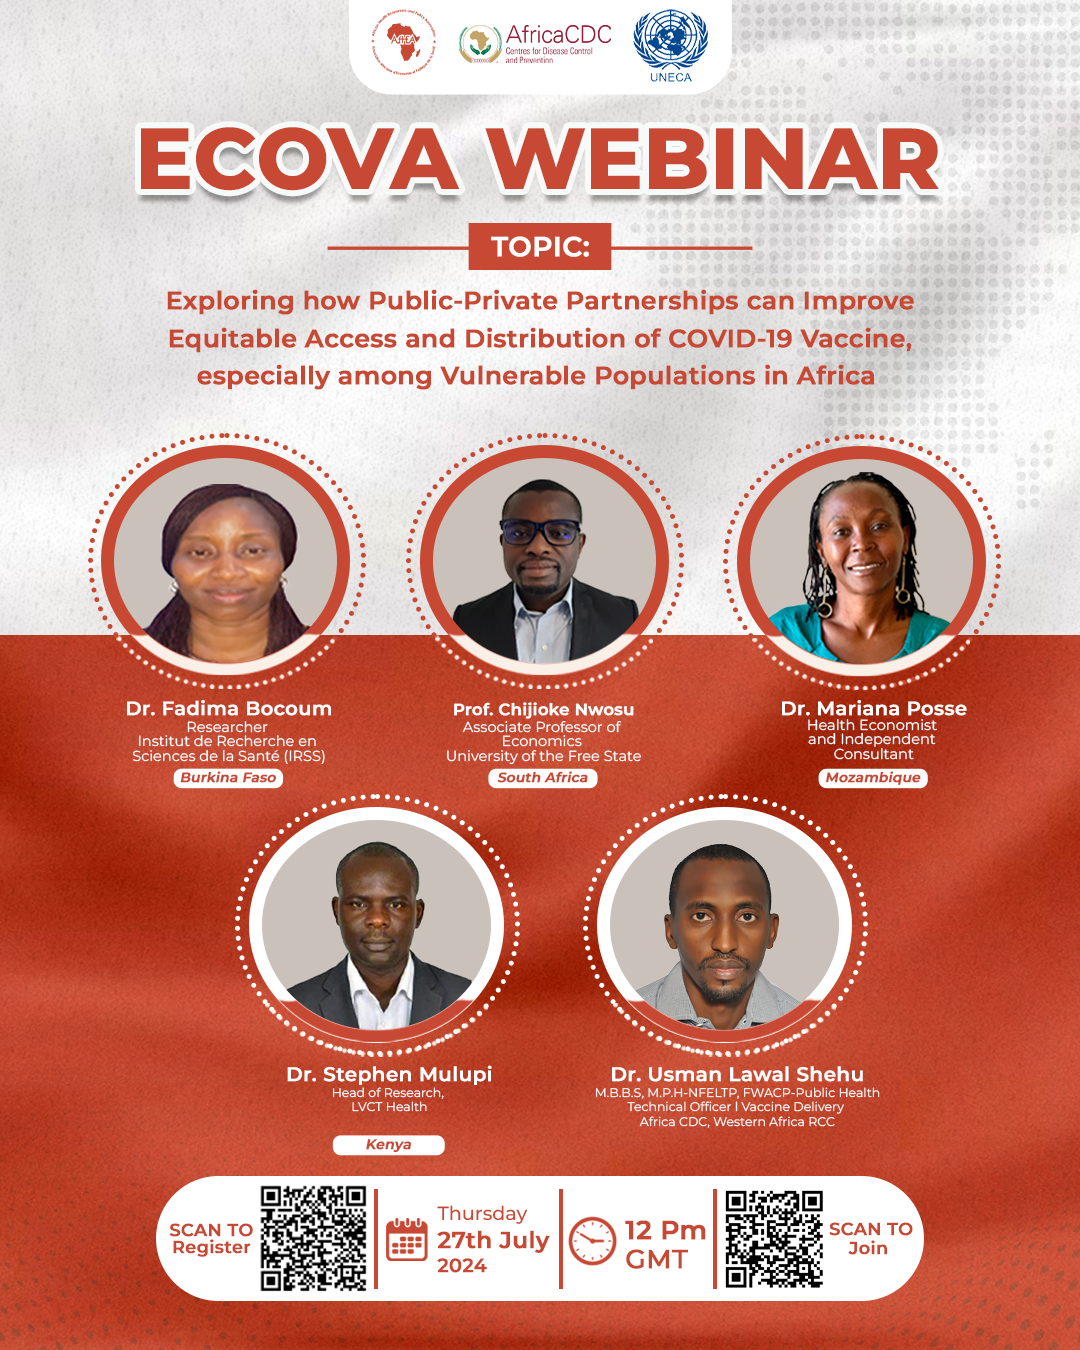 Re-watch Our Webinar on Public-Private Partnerships and Vaccine Equity in Africa! If you missed our insightful webinar titled “Exploring how Public-Private Partnerships can Improve Equitable Access and Distribution of Vaccines, especially among Vulnerable Populations in Africa” held on June 27, 2024, you can re-watch it at your convenience. For more details about the webinar and access to the recording, please visit https://us06web.zoom.us/rec/share/F6L2lyawgenK4q_OlnLM0gLvJ9xKBQV6loz_im7i4_Gijl2KOqrVc8JlY3wzthu6.ulSNai4JLAFVqEMy Passcode: JxFfMM9! Revoyez notre webinaire sur les partenariats public-privé et l’équité en matière de vaccins en Afrique !